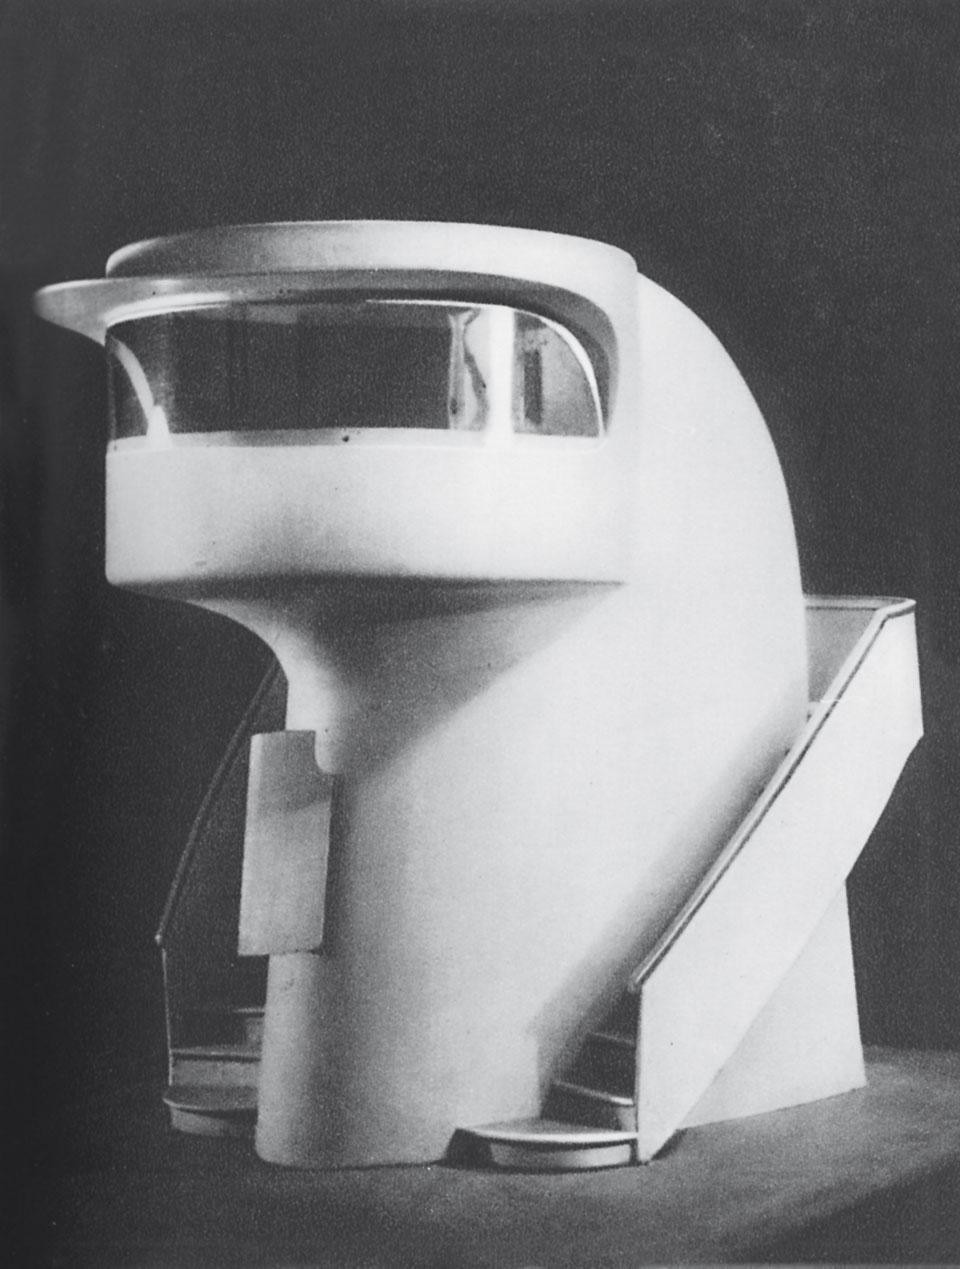 Model of a timekeeping
pavilion, designed by
Guglielmo Giuliano for
the 1936 Berlin Olympics
competition